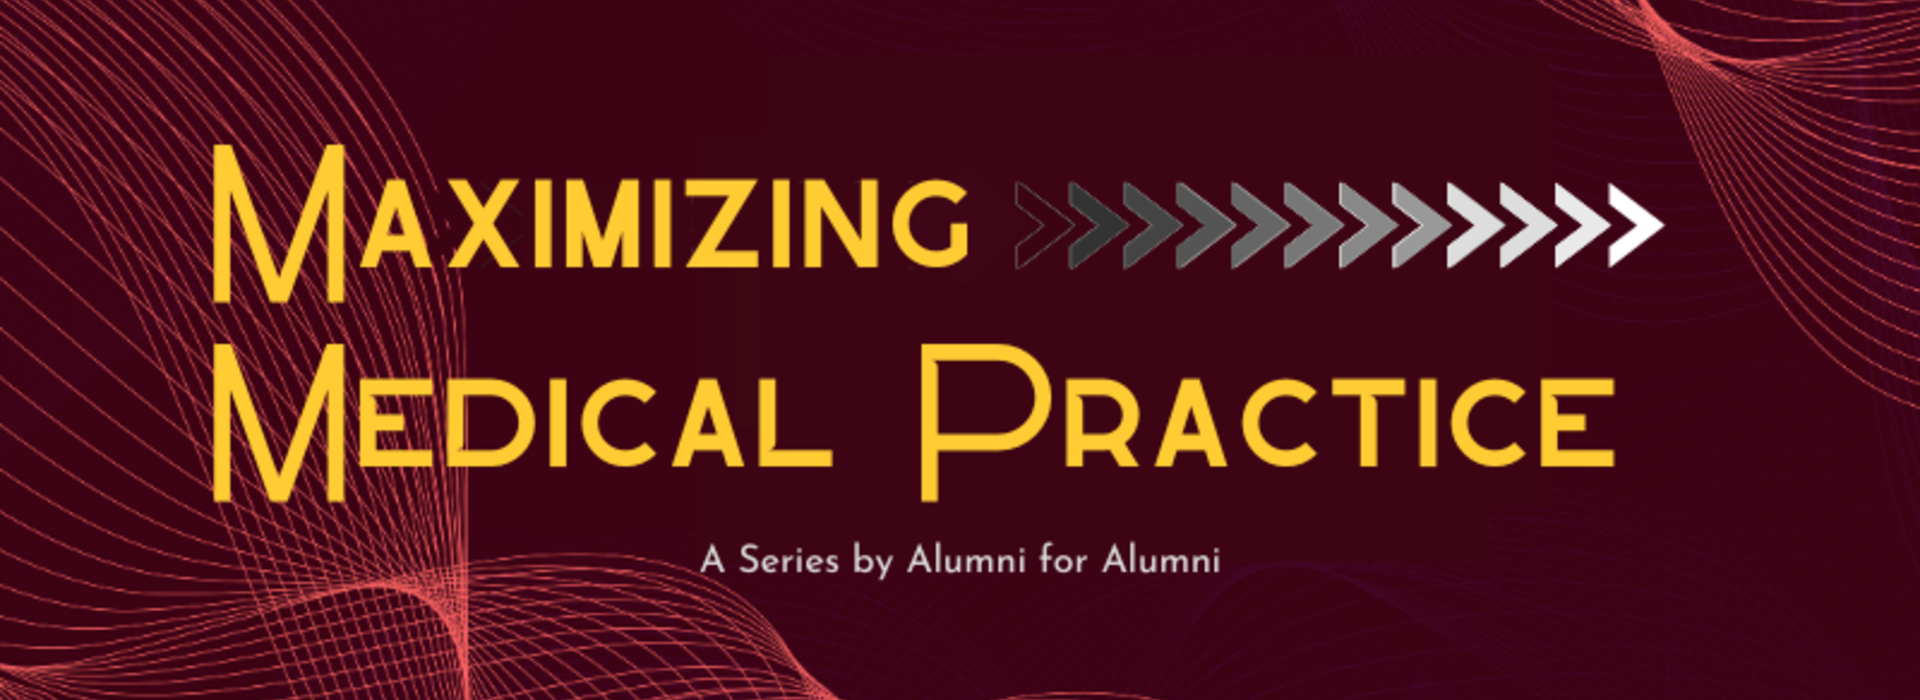 Maximizing Medical Practice - A series by alumni for alumni